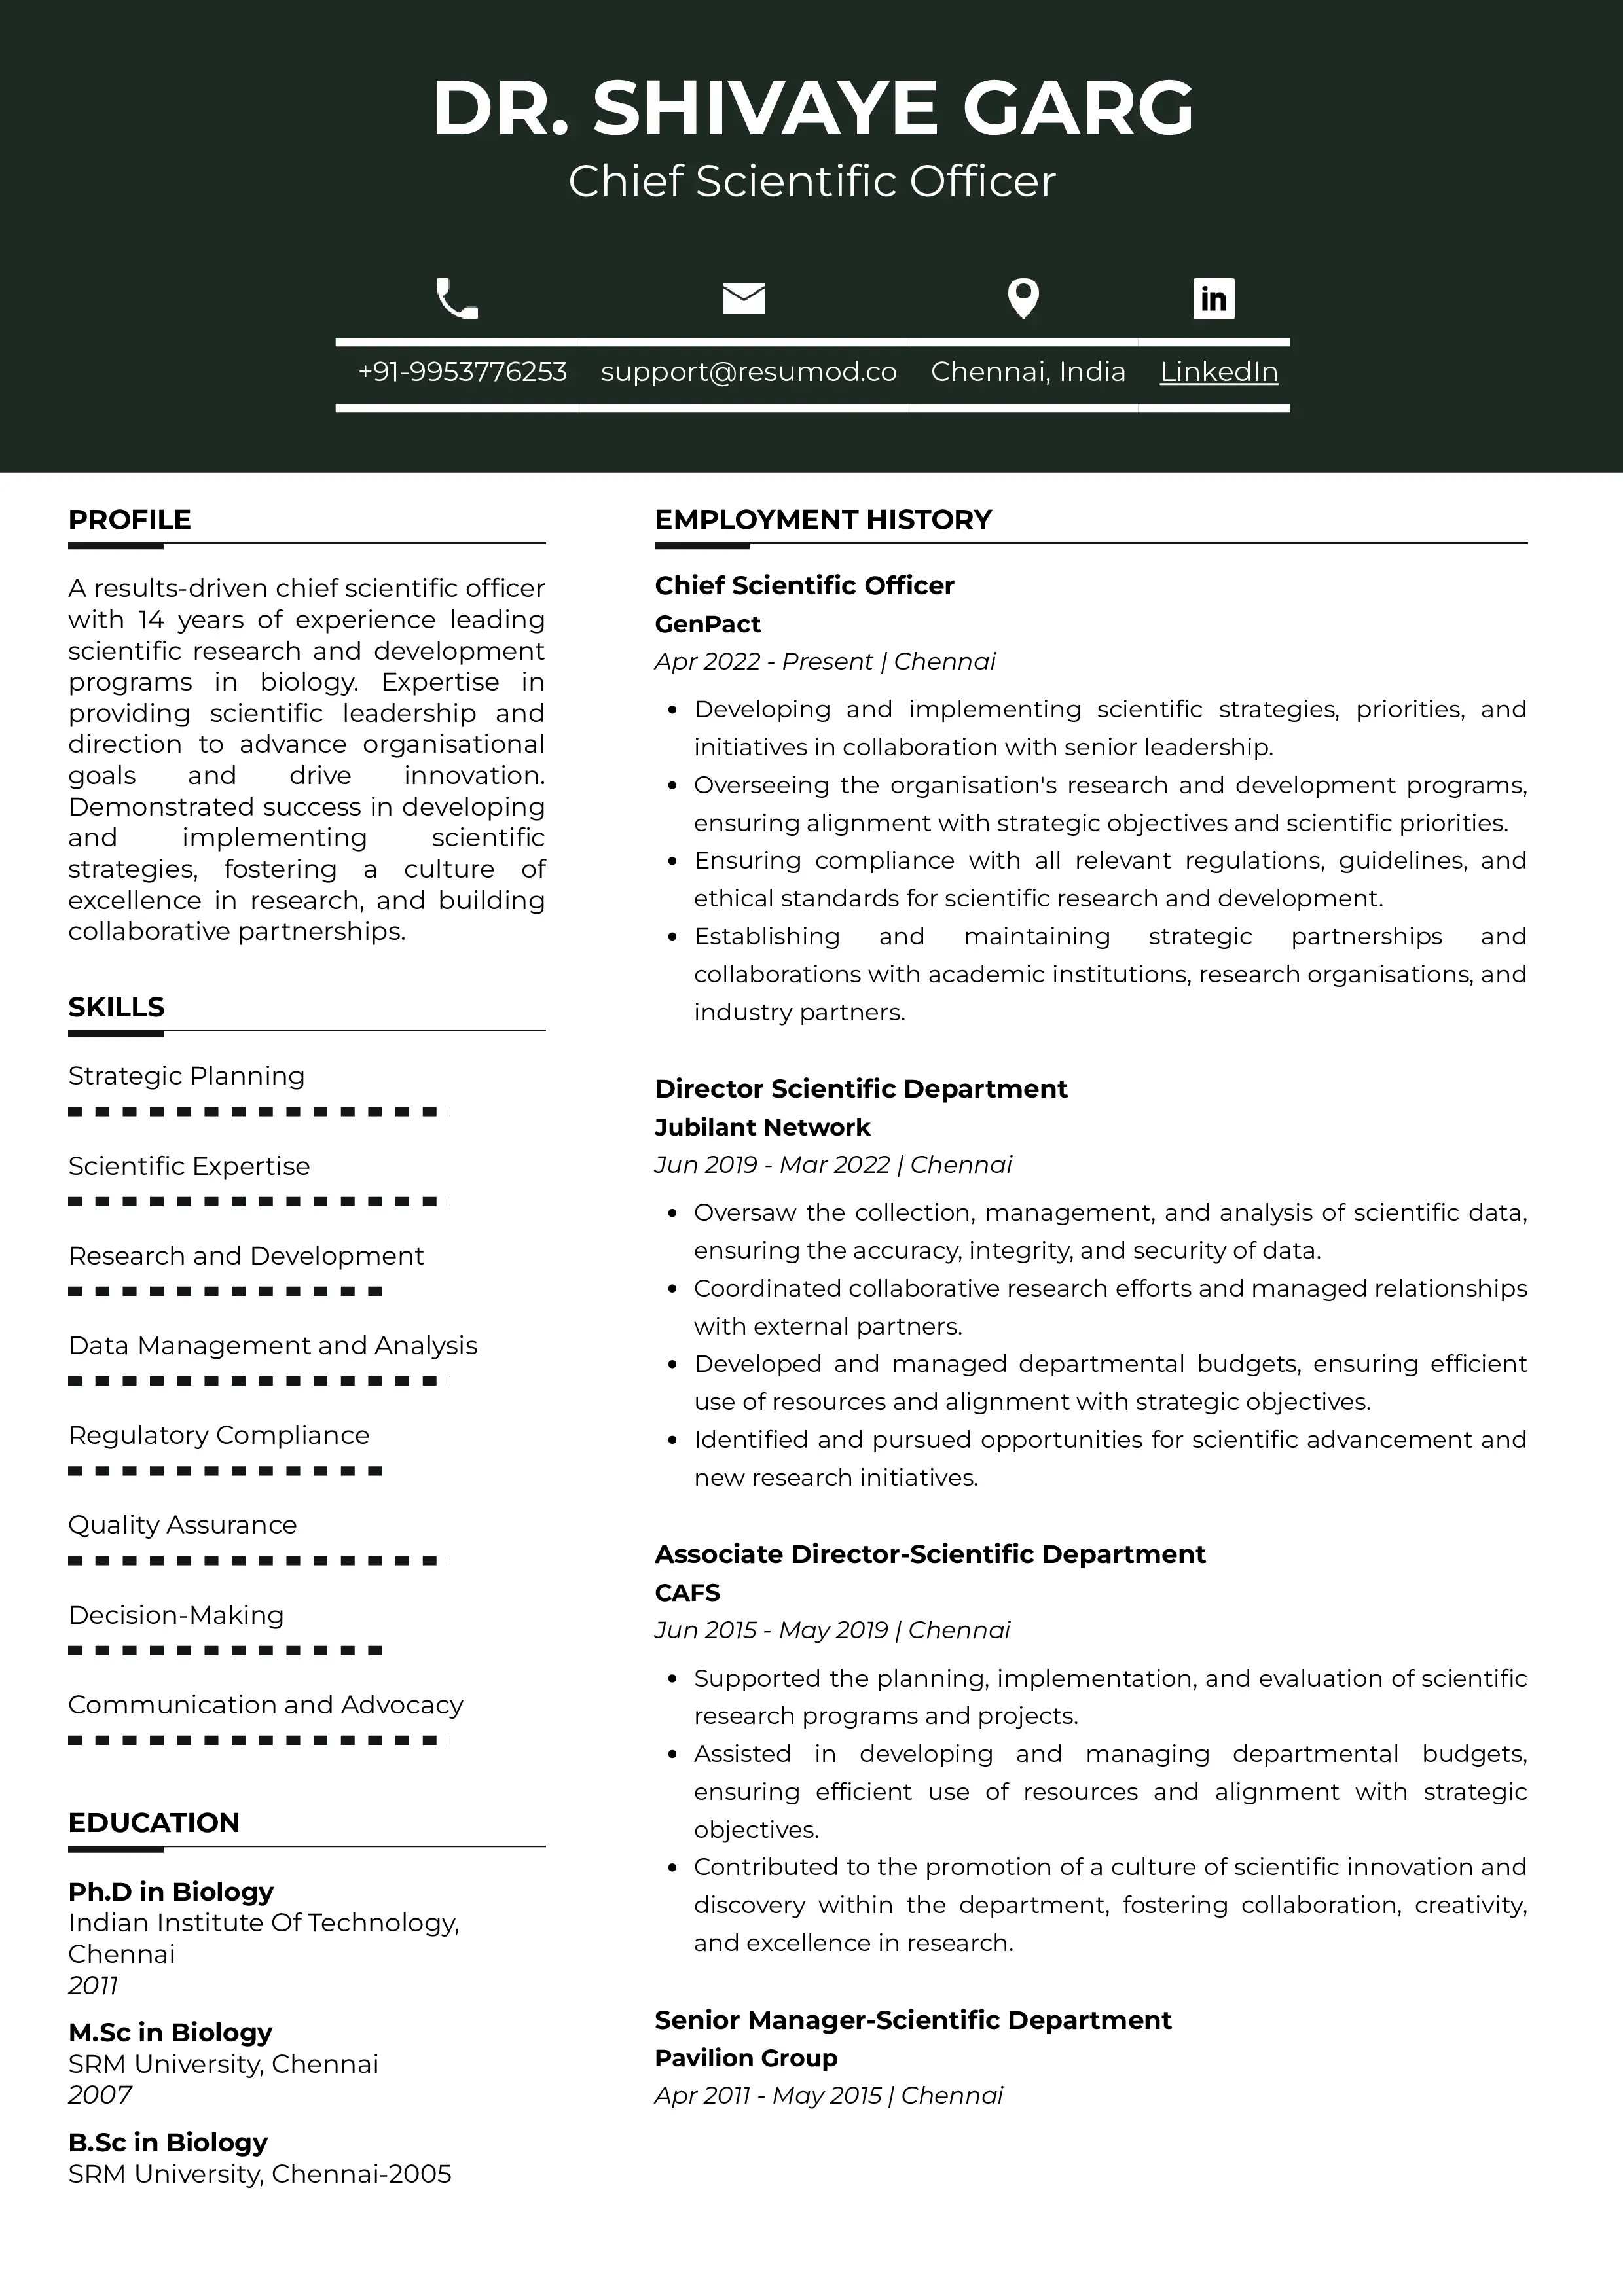 Sample Resume of Chief Scientific Officer | Free Resume Templates & Samples on Resumod.co